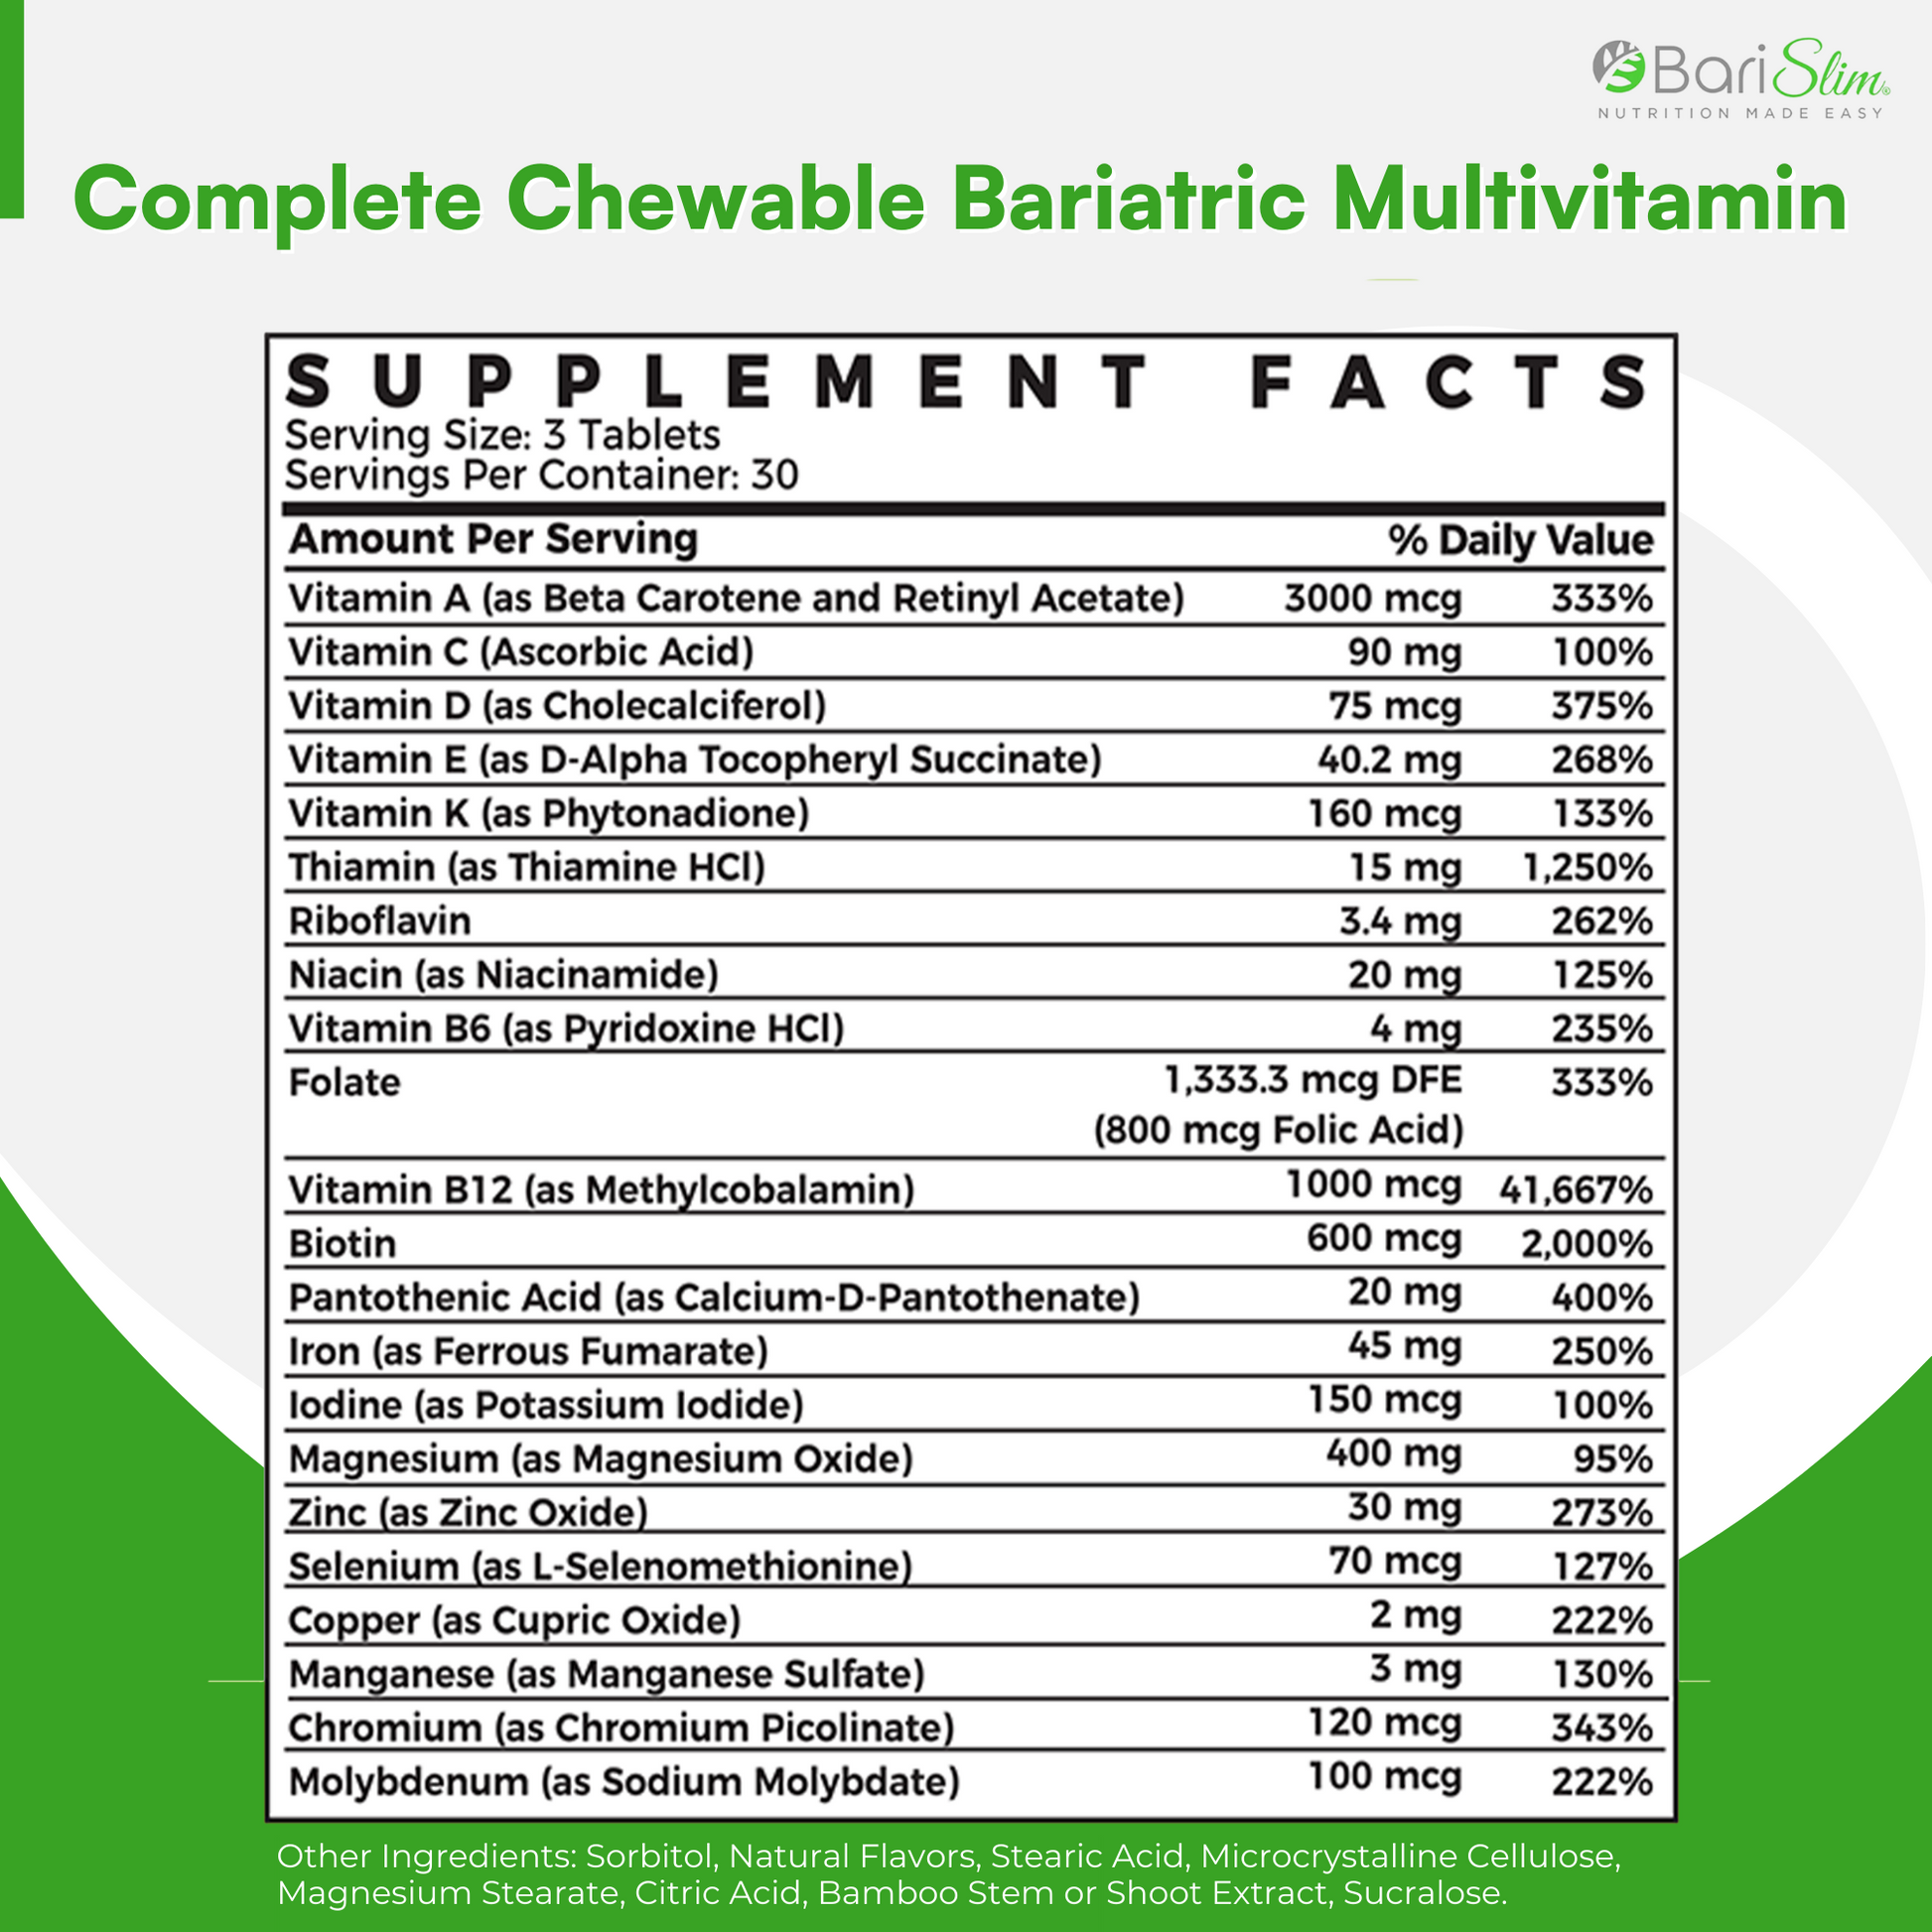 Supplements Facts for complete chewable bariatric multivitamin